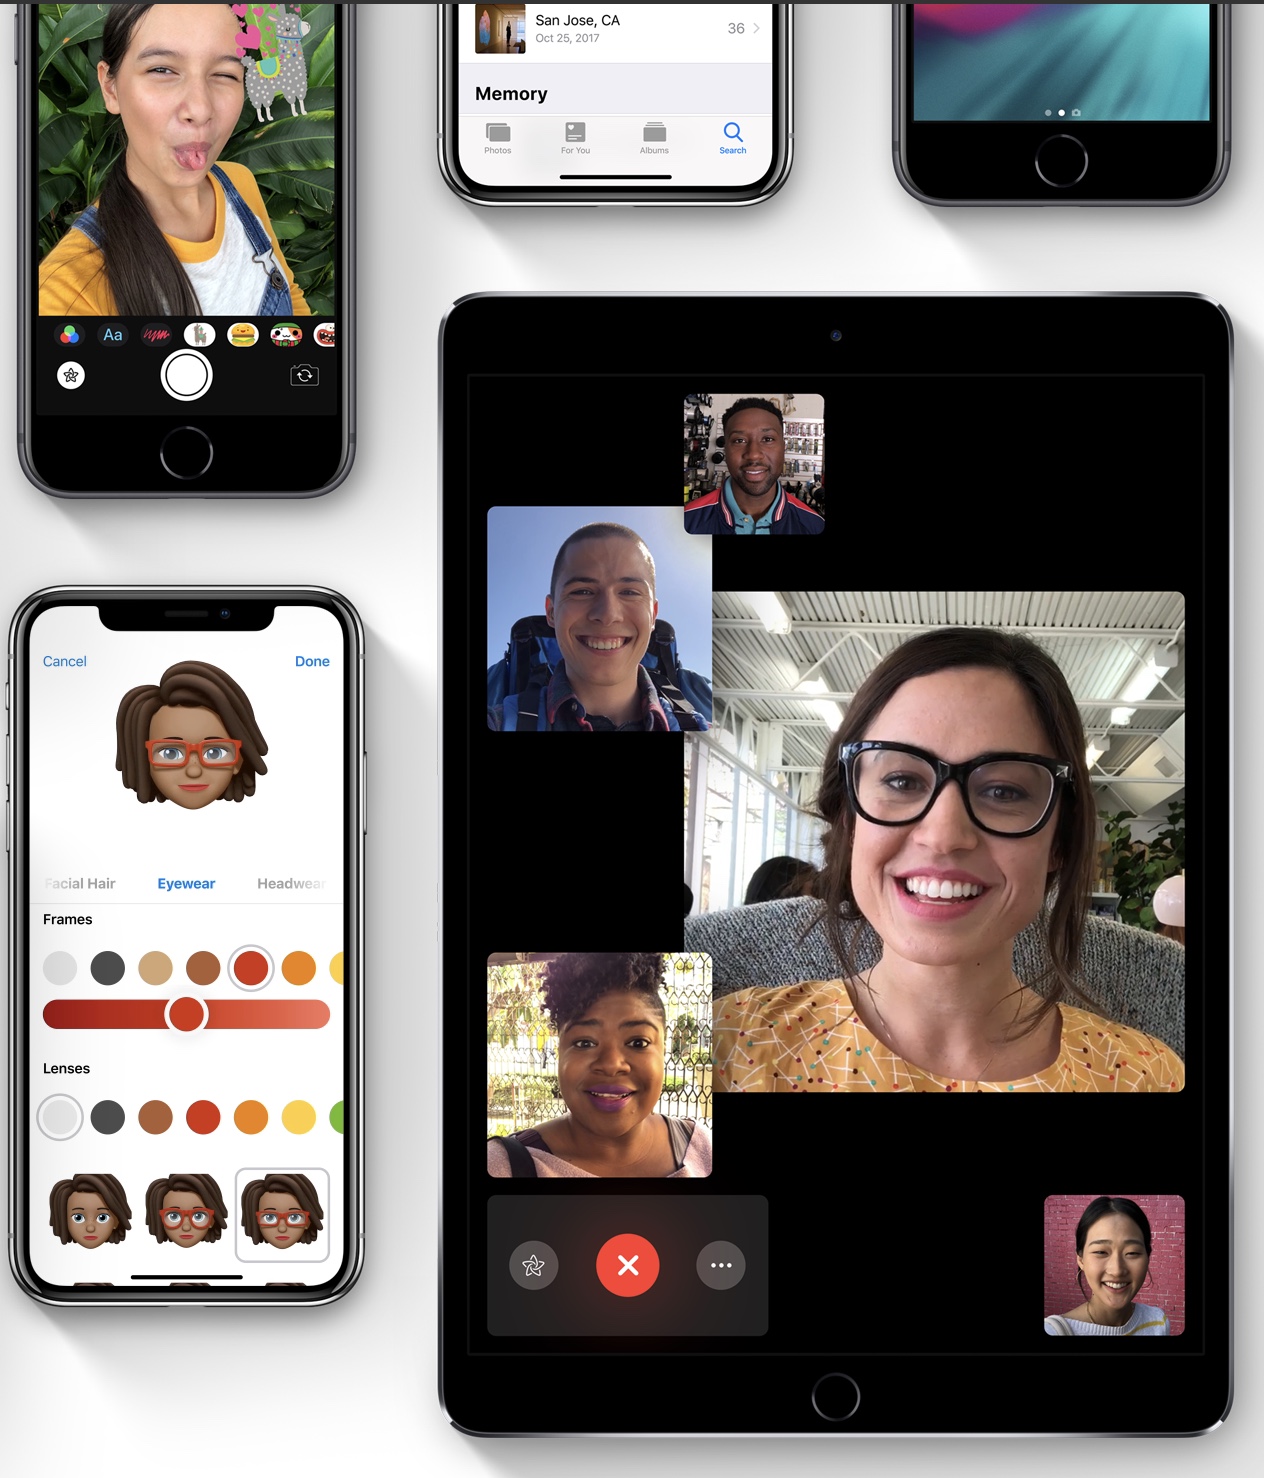 All iOS apps and app updates must be built with the iOS 12.1 SDK (or later) starting March 27